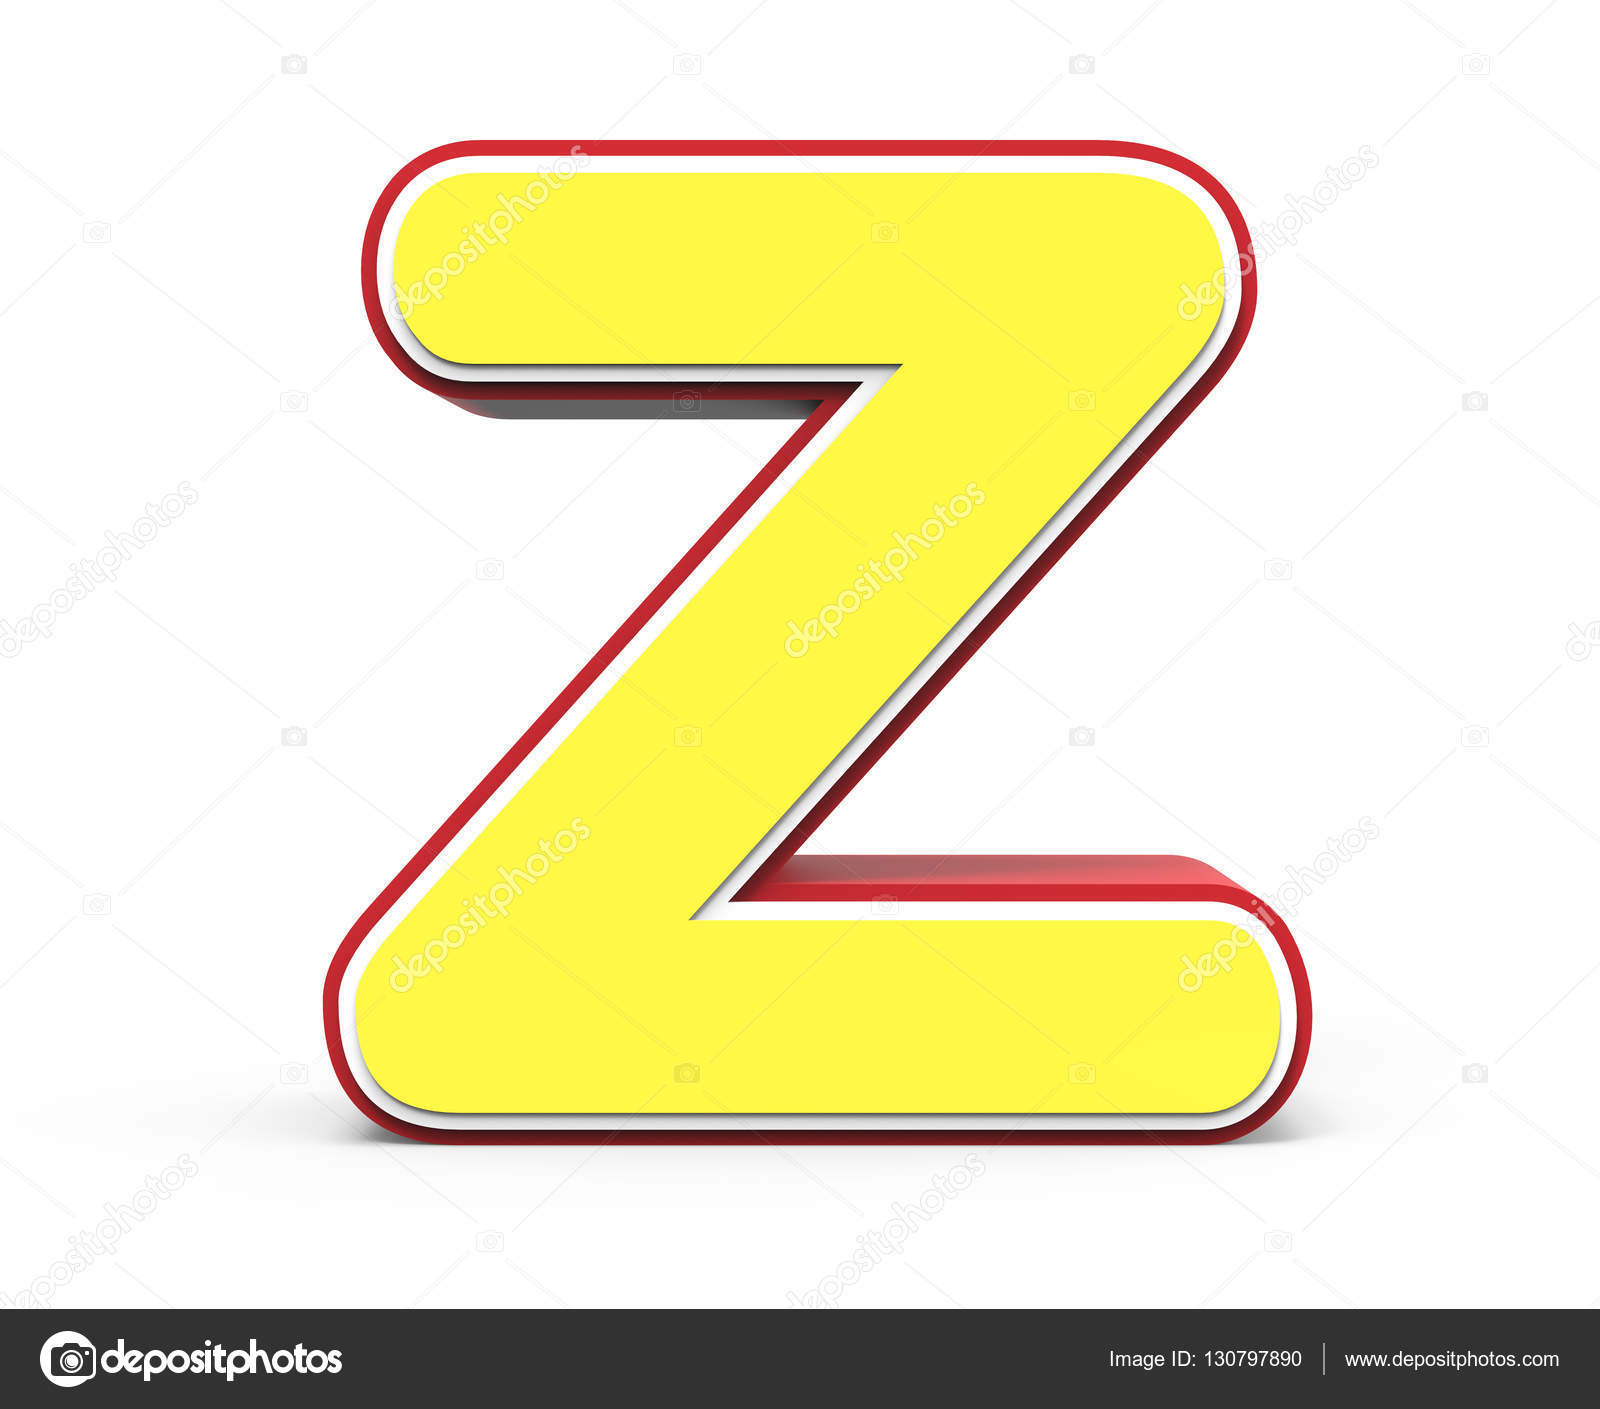 Z Word Images Royalty Free Stock Z Word Photos Pictures Depositphotos